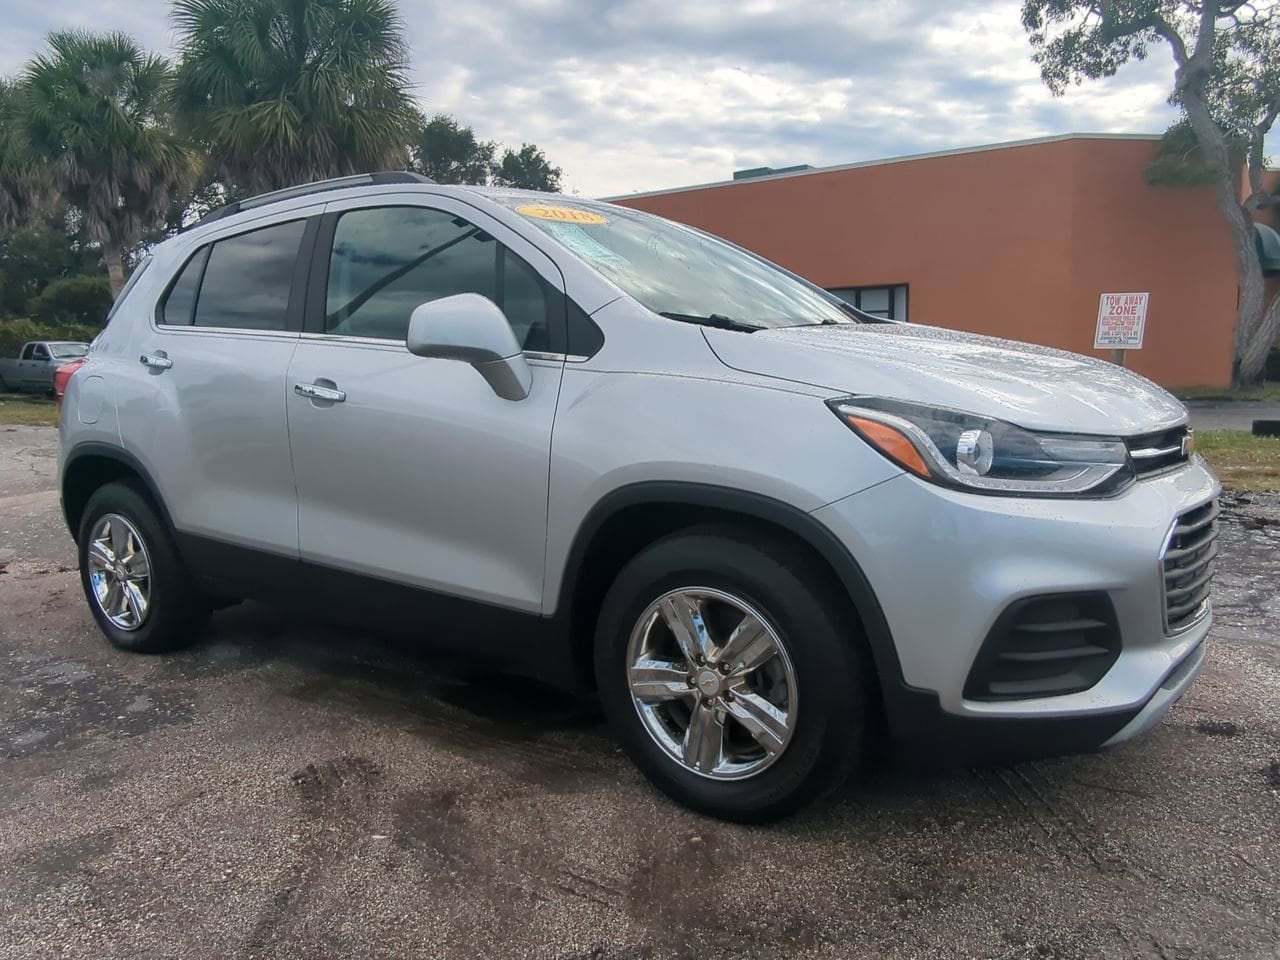 Used 2018 Chevrolet Trax LT with VIN KL7CJLSB7JB583342 for sale in Labelle, FL